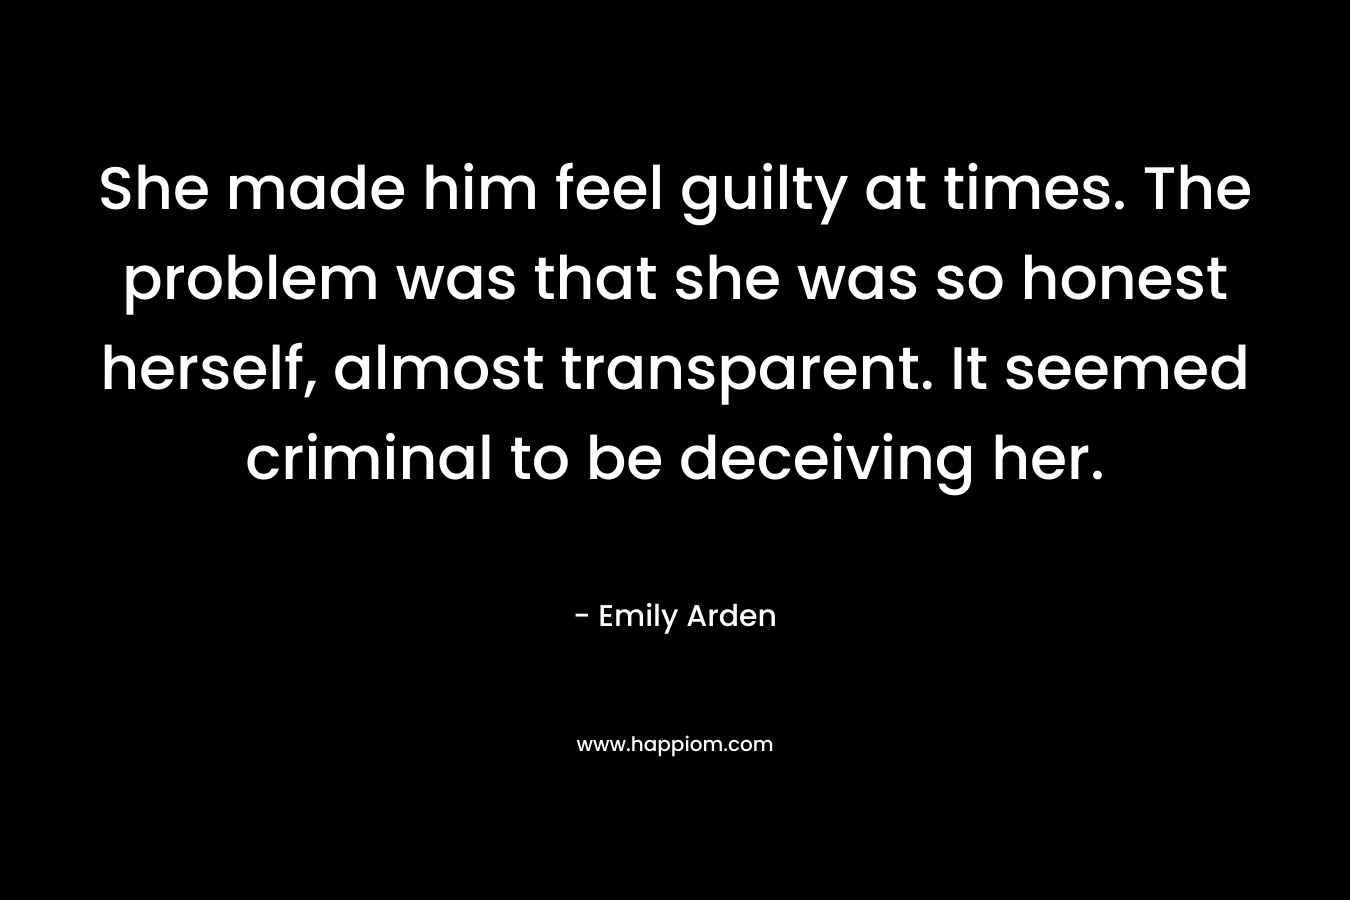 She made him feel guilty at times. The problem was that she was so honest herself, almost transparent. It seemed criminal to be deceiving her.